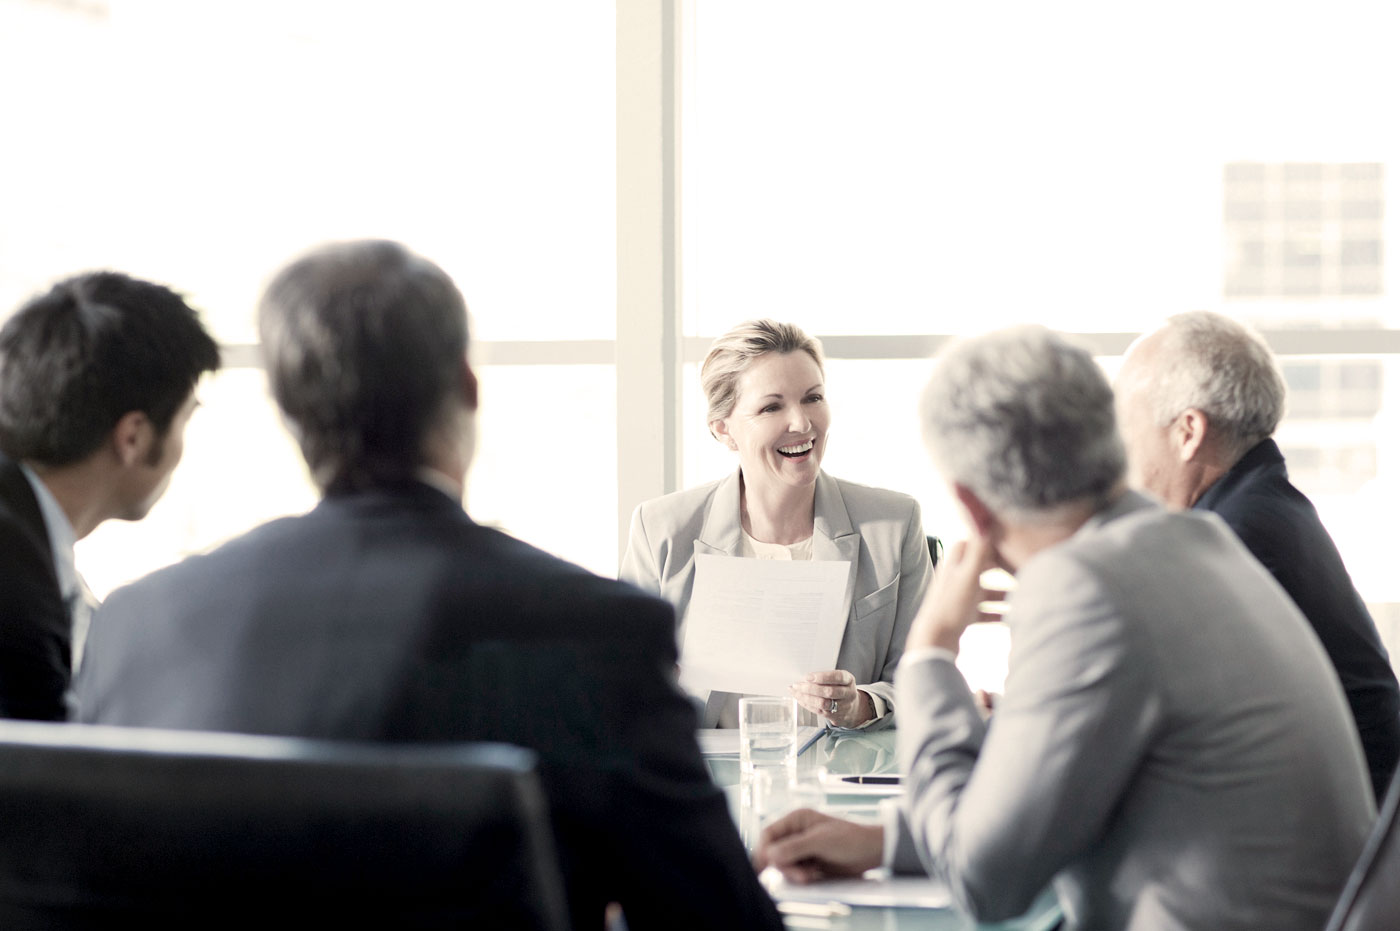 A group of business people sitting around a conference table talking and smiling.